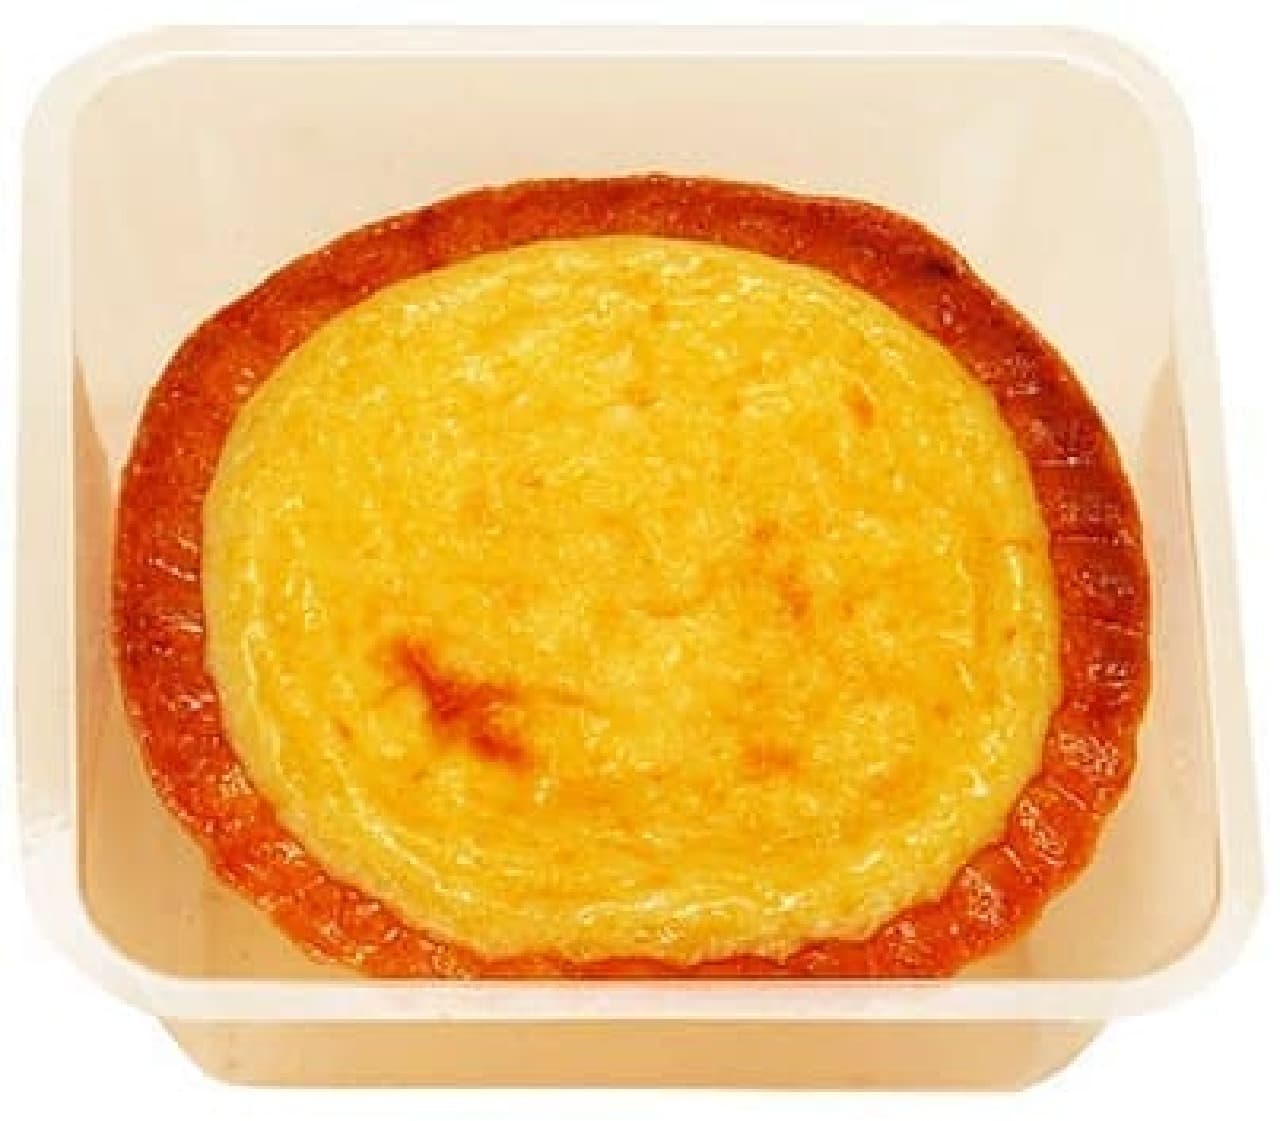 FamilyMart "Thick Grilled Cheese Tart"